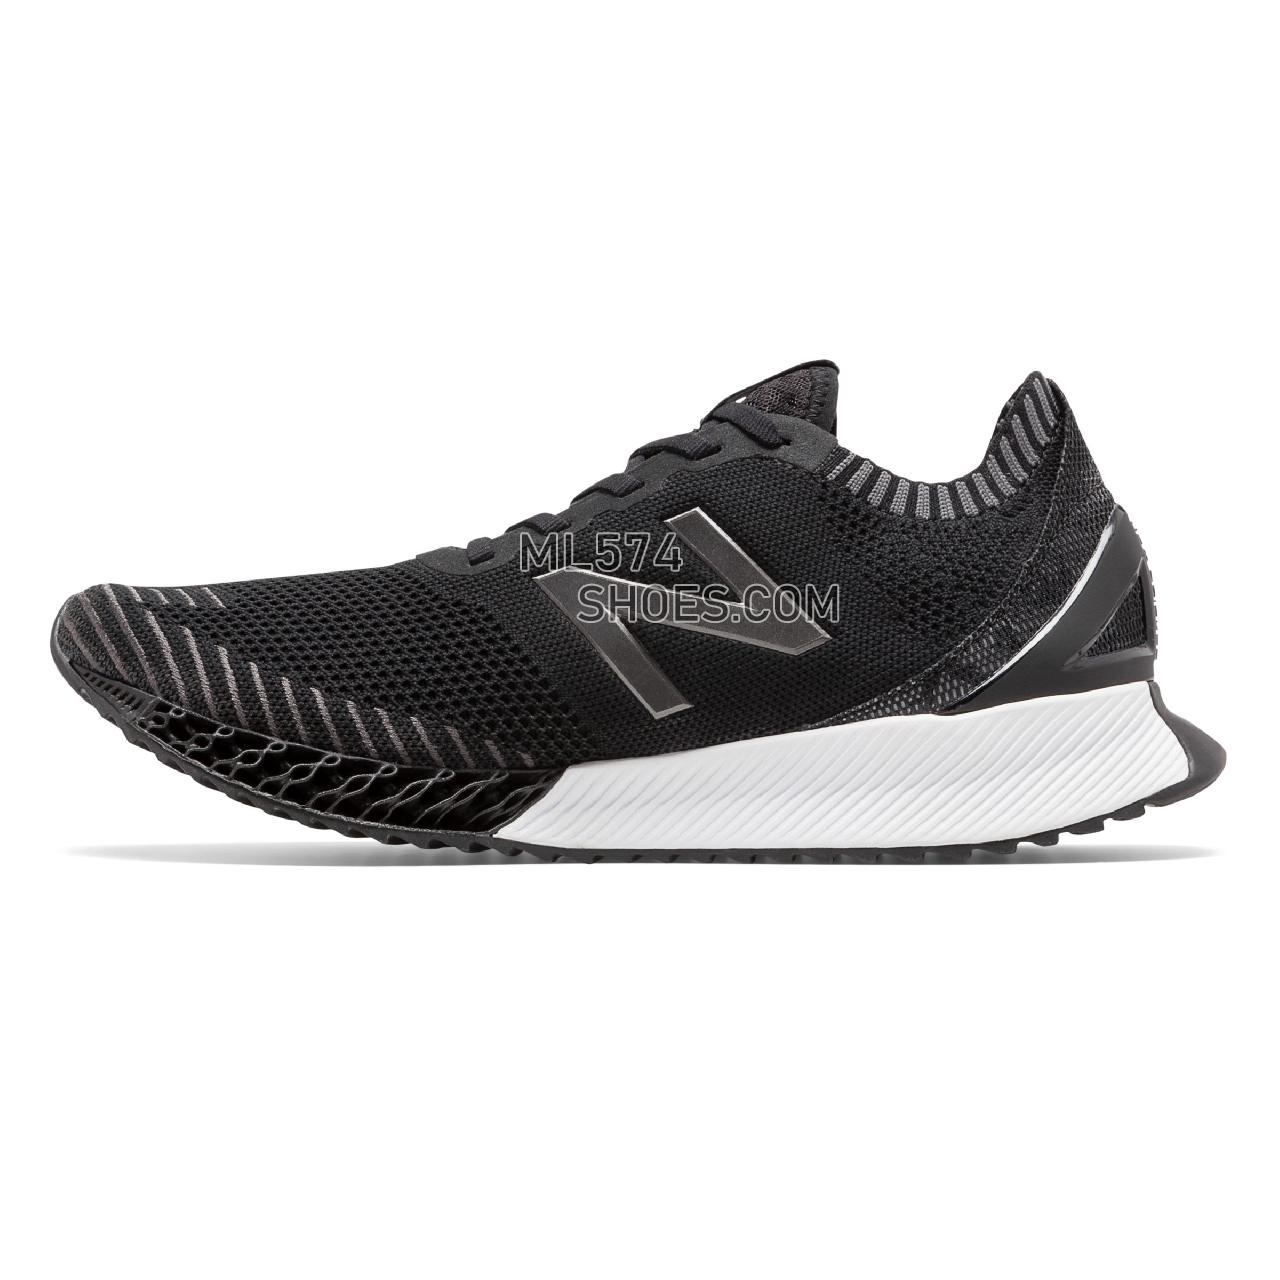 New Balance FuelCell Echo Triple - Men's Fuelcell TripleCell Echo MTRPBV1-26124-M - Black with Magnet and Gunmetal - MTRPBBR